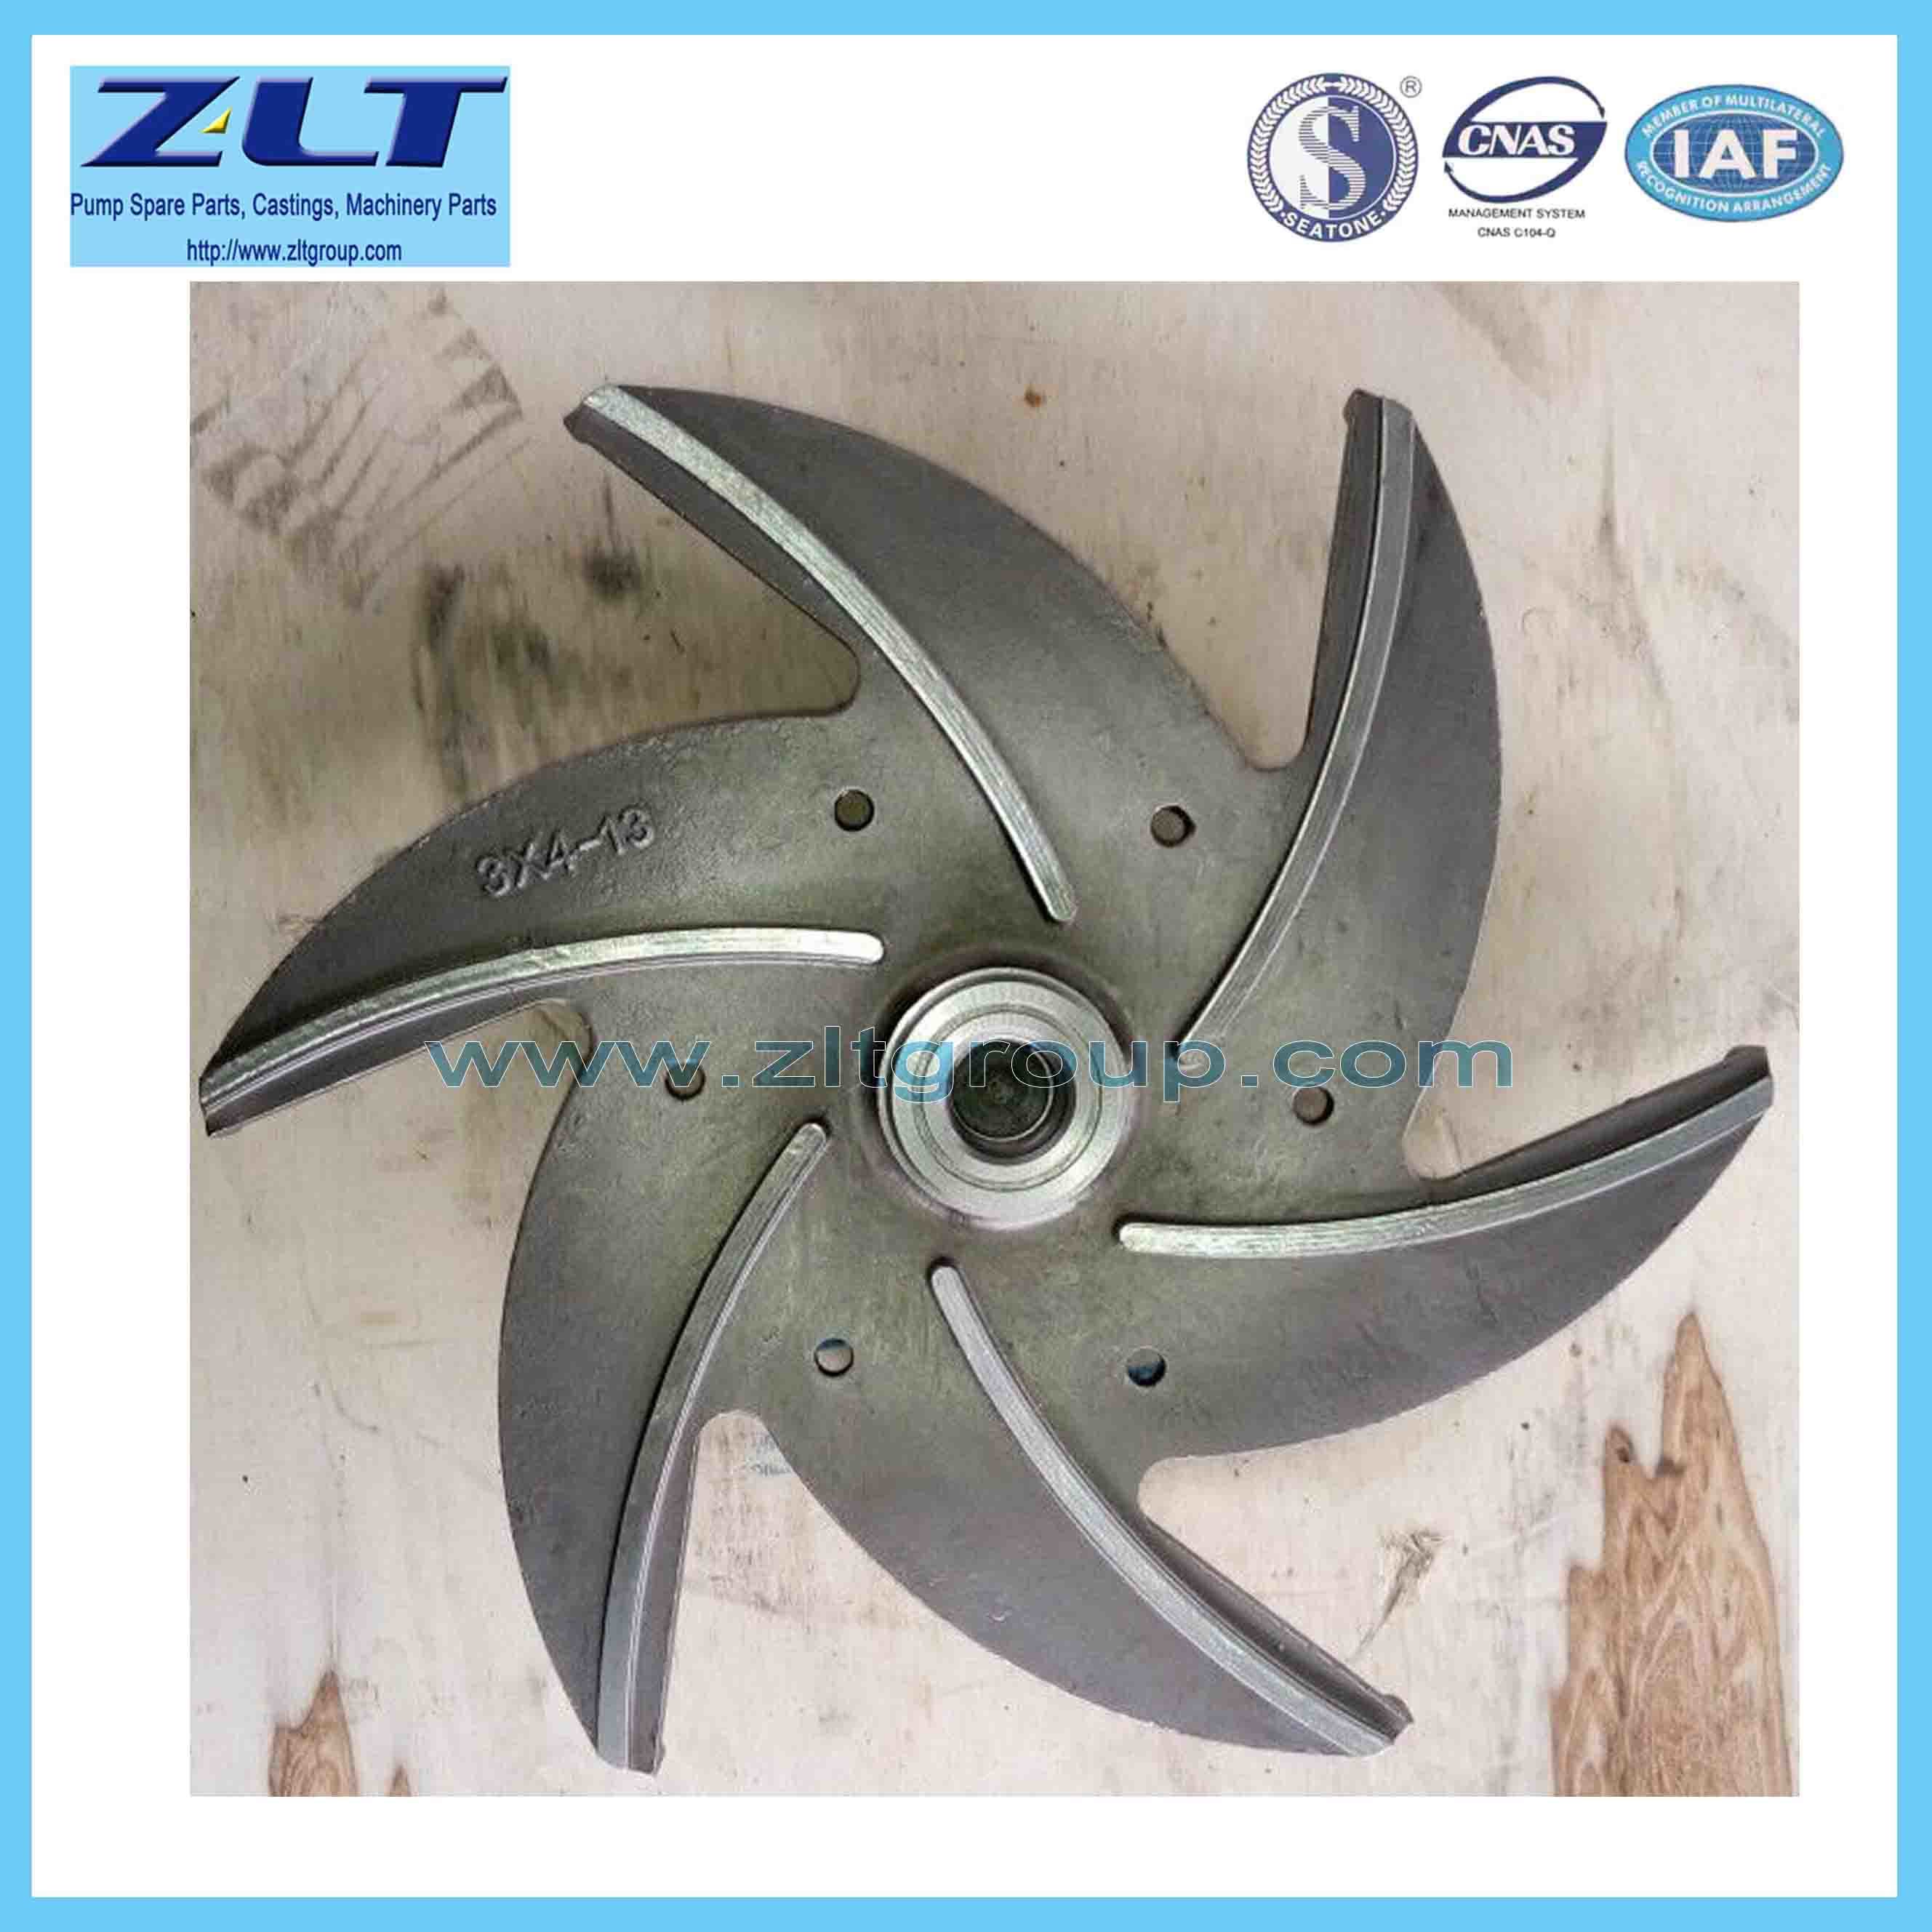 Investment Casting for Casting